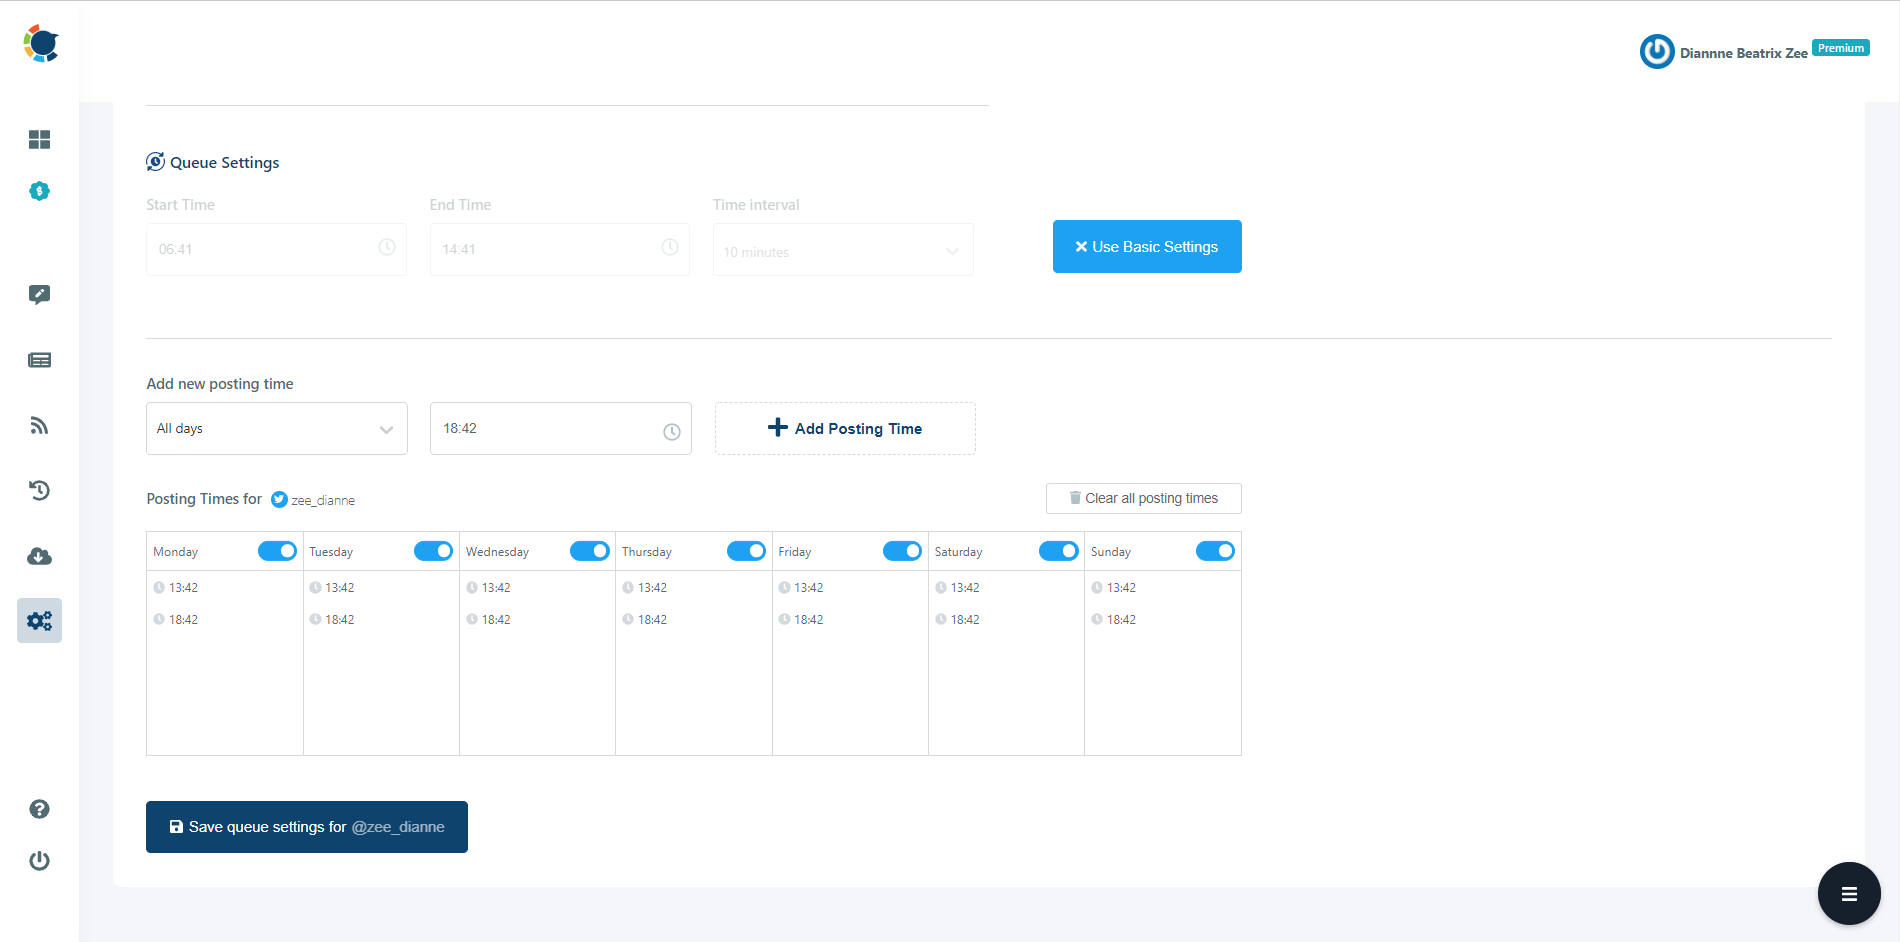 The advanced plan enables you to customize auto-post settings for your curated content.